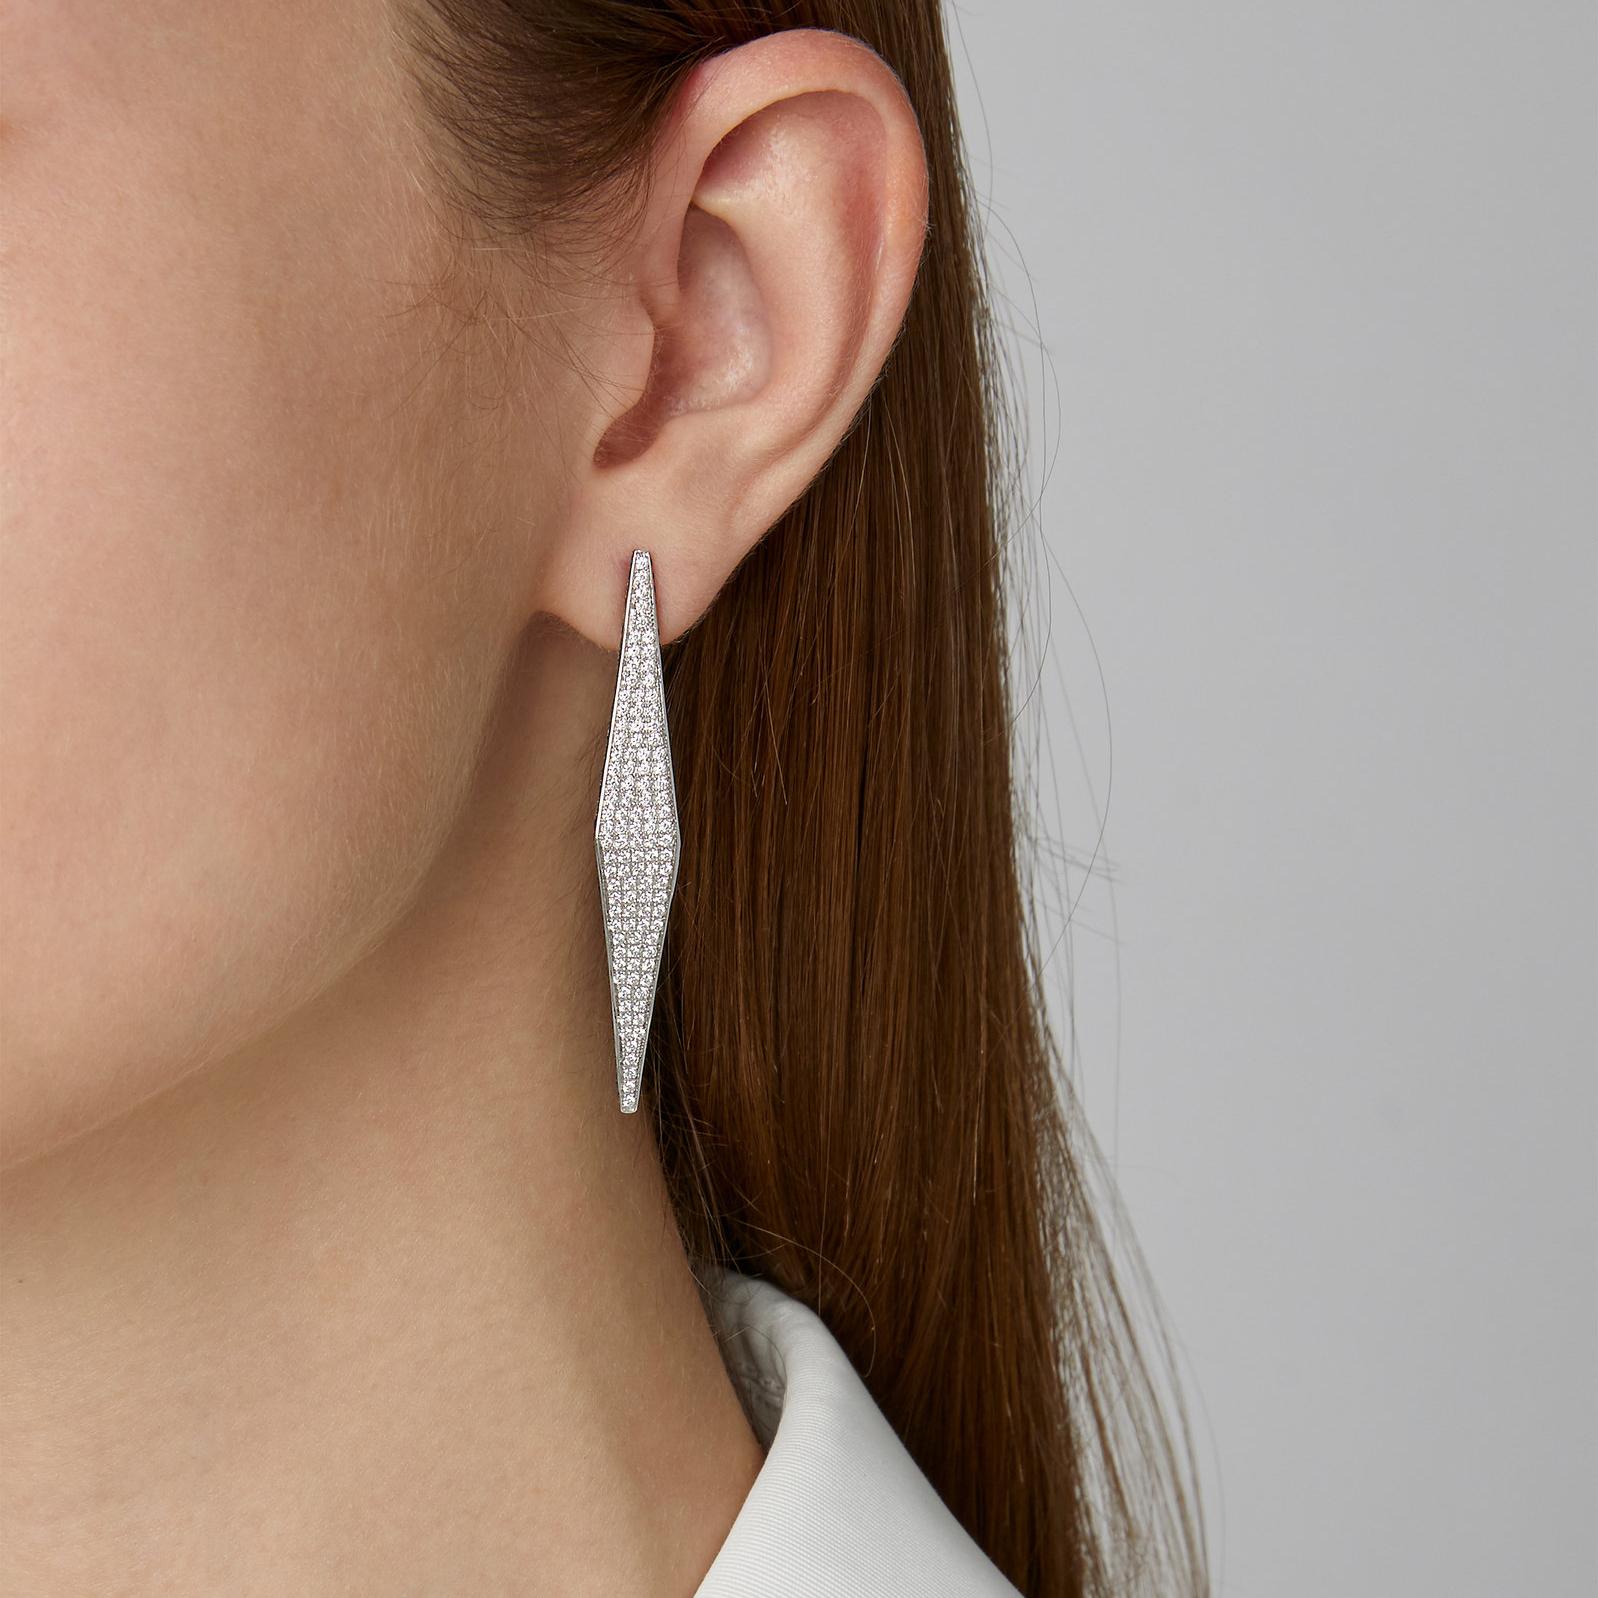 18kt white gold earrings with diamonds and blue sapphires from Ralph Masri's Modernist collection, inspired by mid-century Modernist architecture with an emphasis on minimalist shapes and silhouettes.

Available in yellow, rose or white gold.

Push